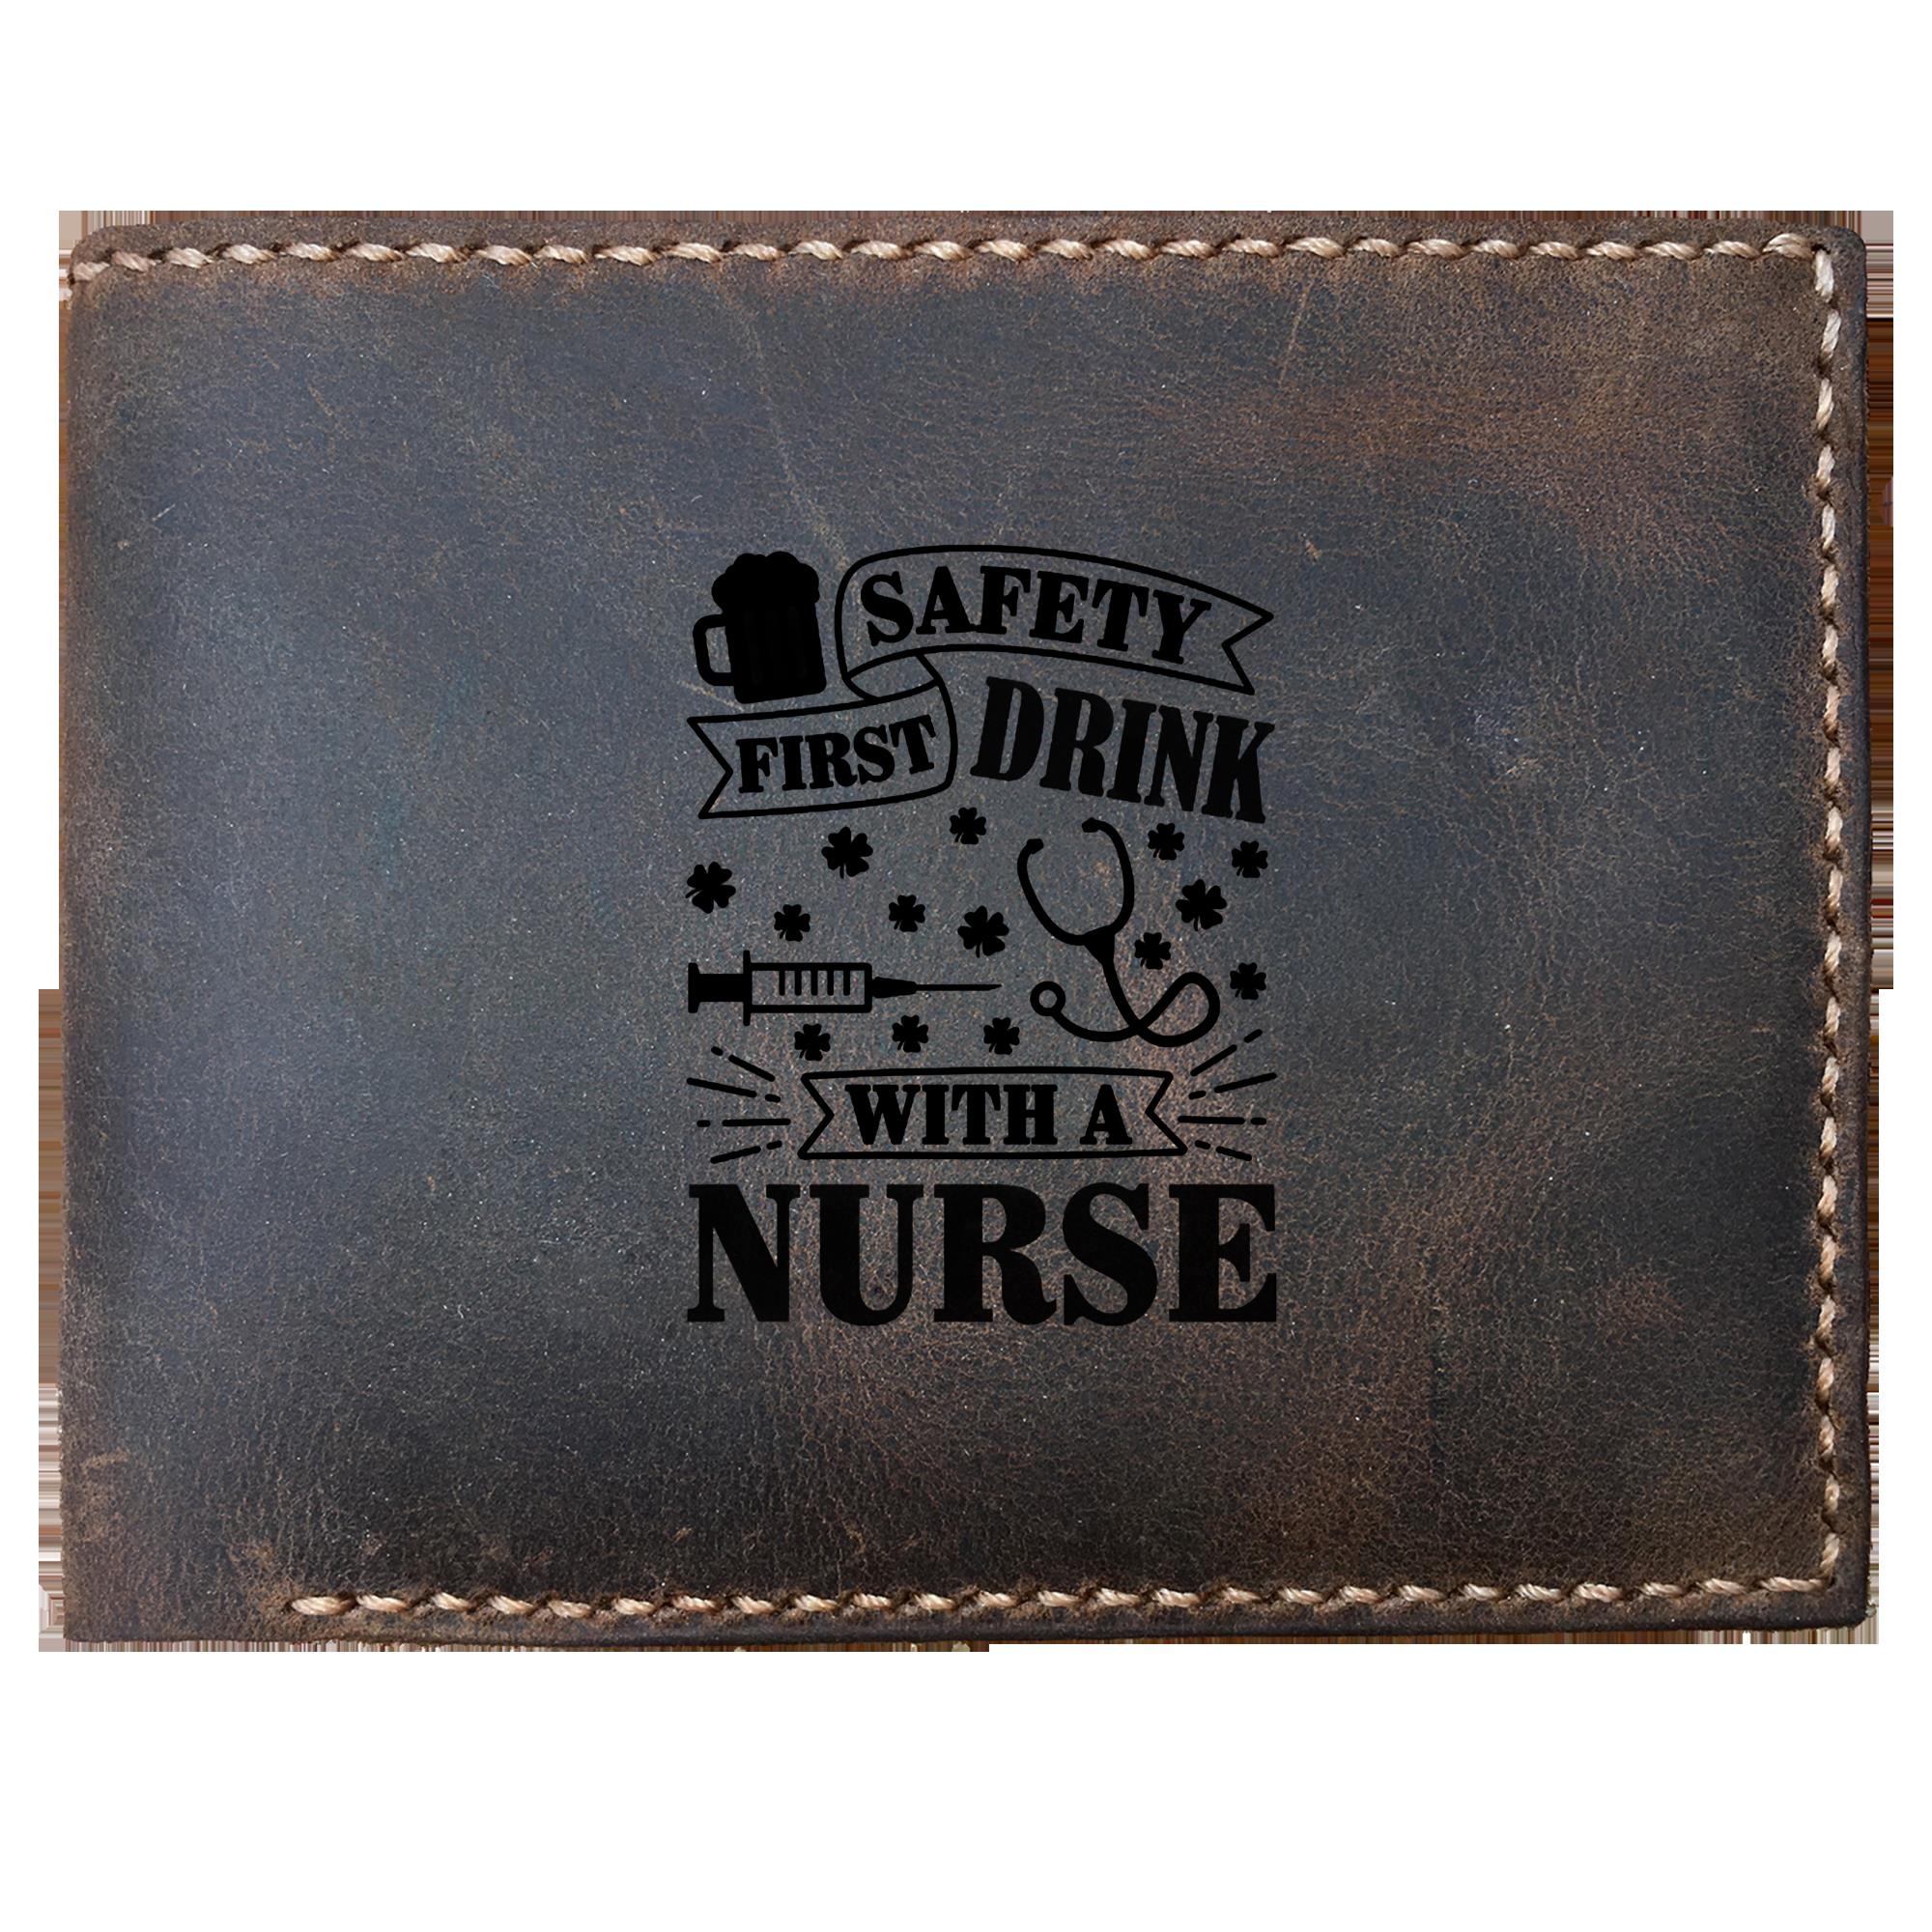 Skitongifts Funny Custom Laser Engraved Bifold Leather Wallet For Men, Safety First Drink With A Nurse St Patrick Day